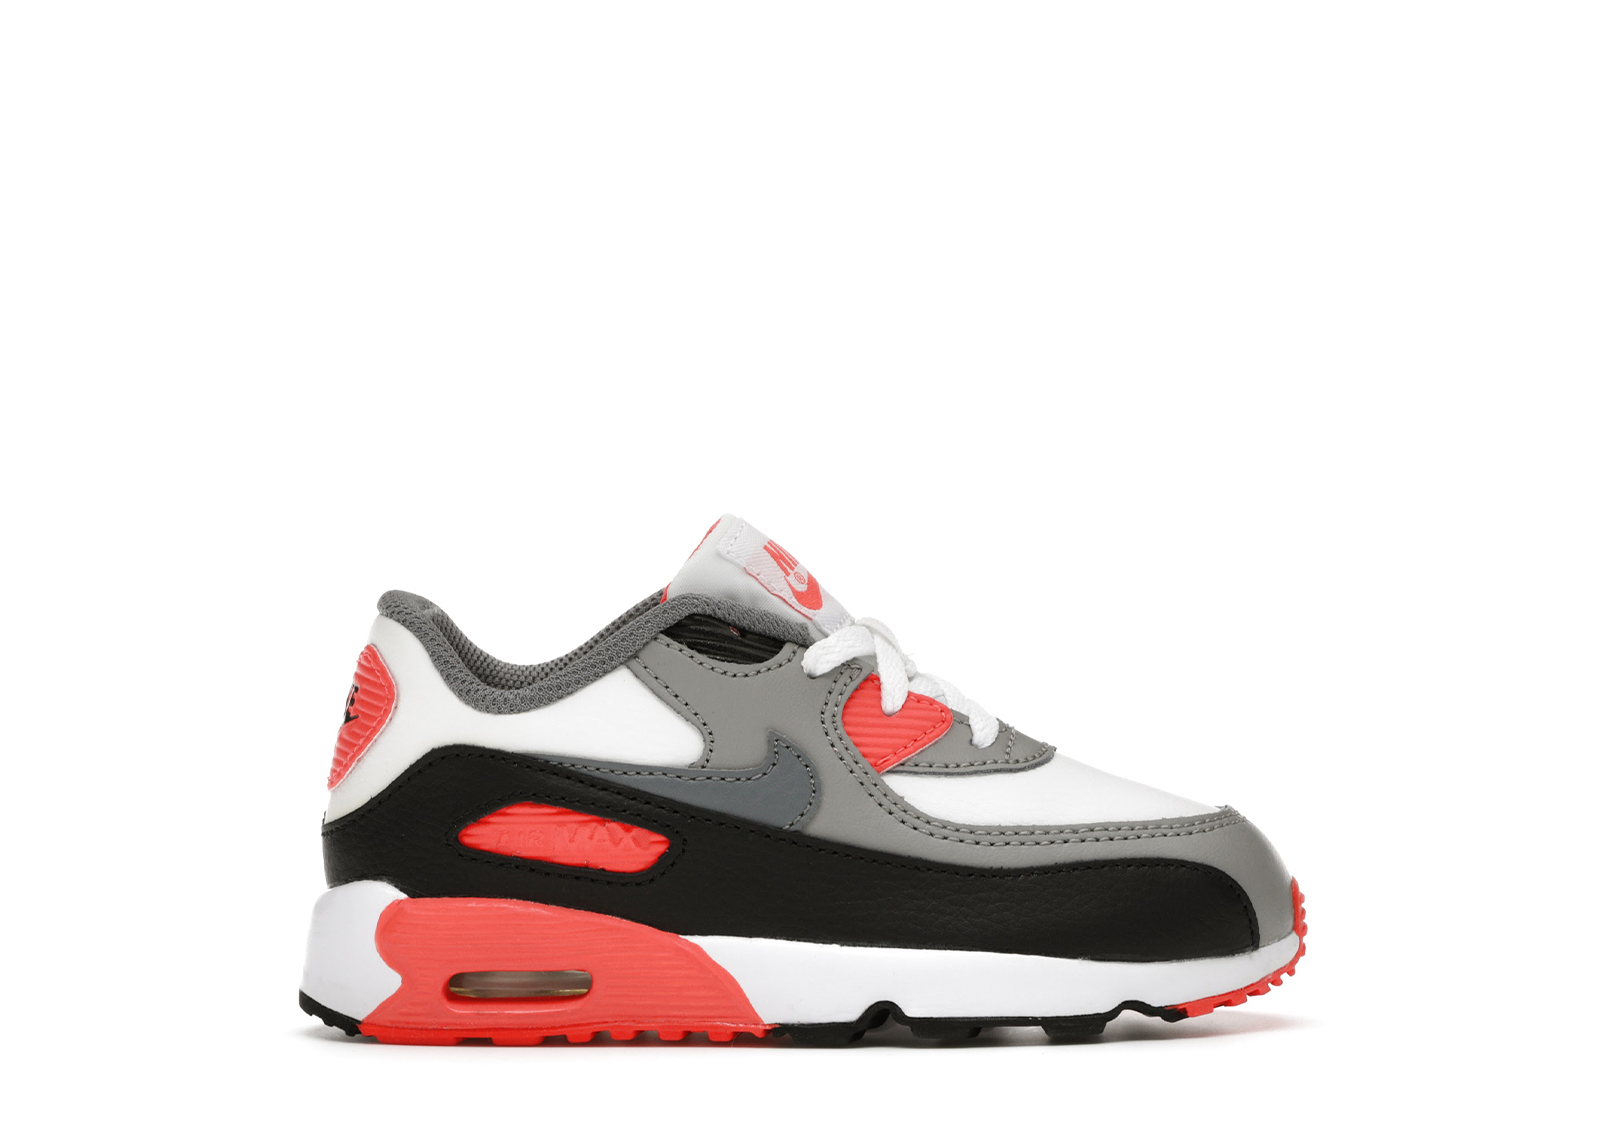 stockx nike air max 90 infrared